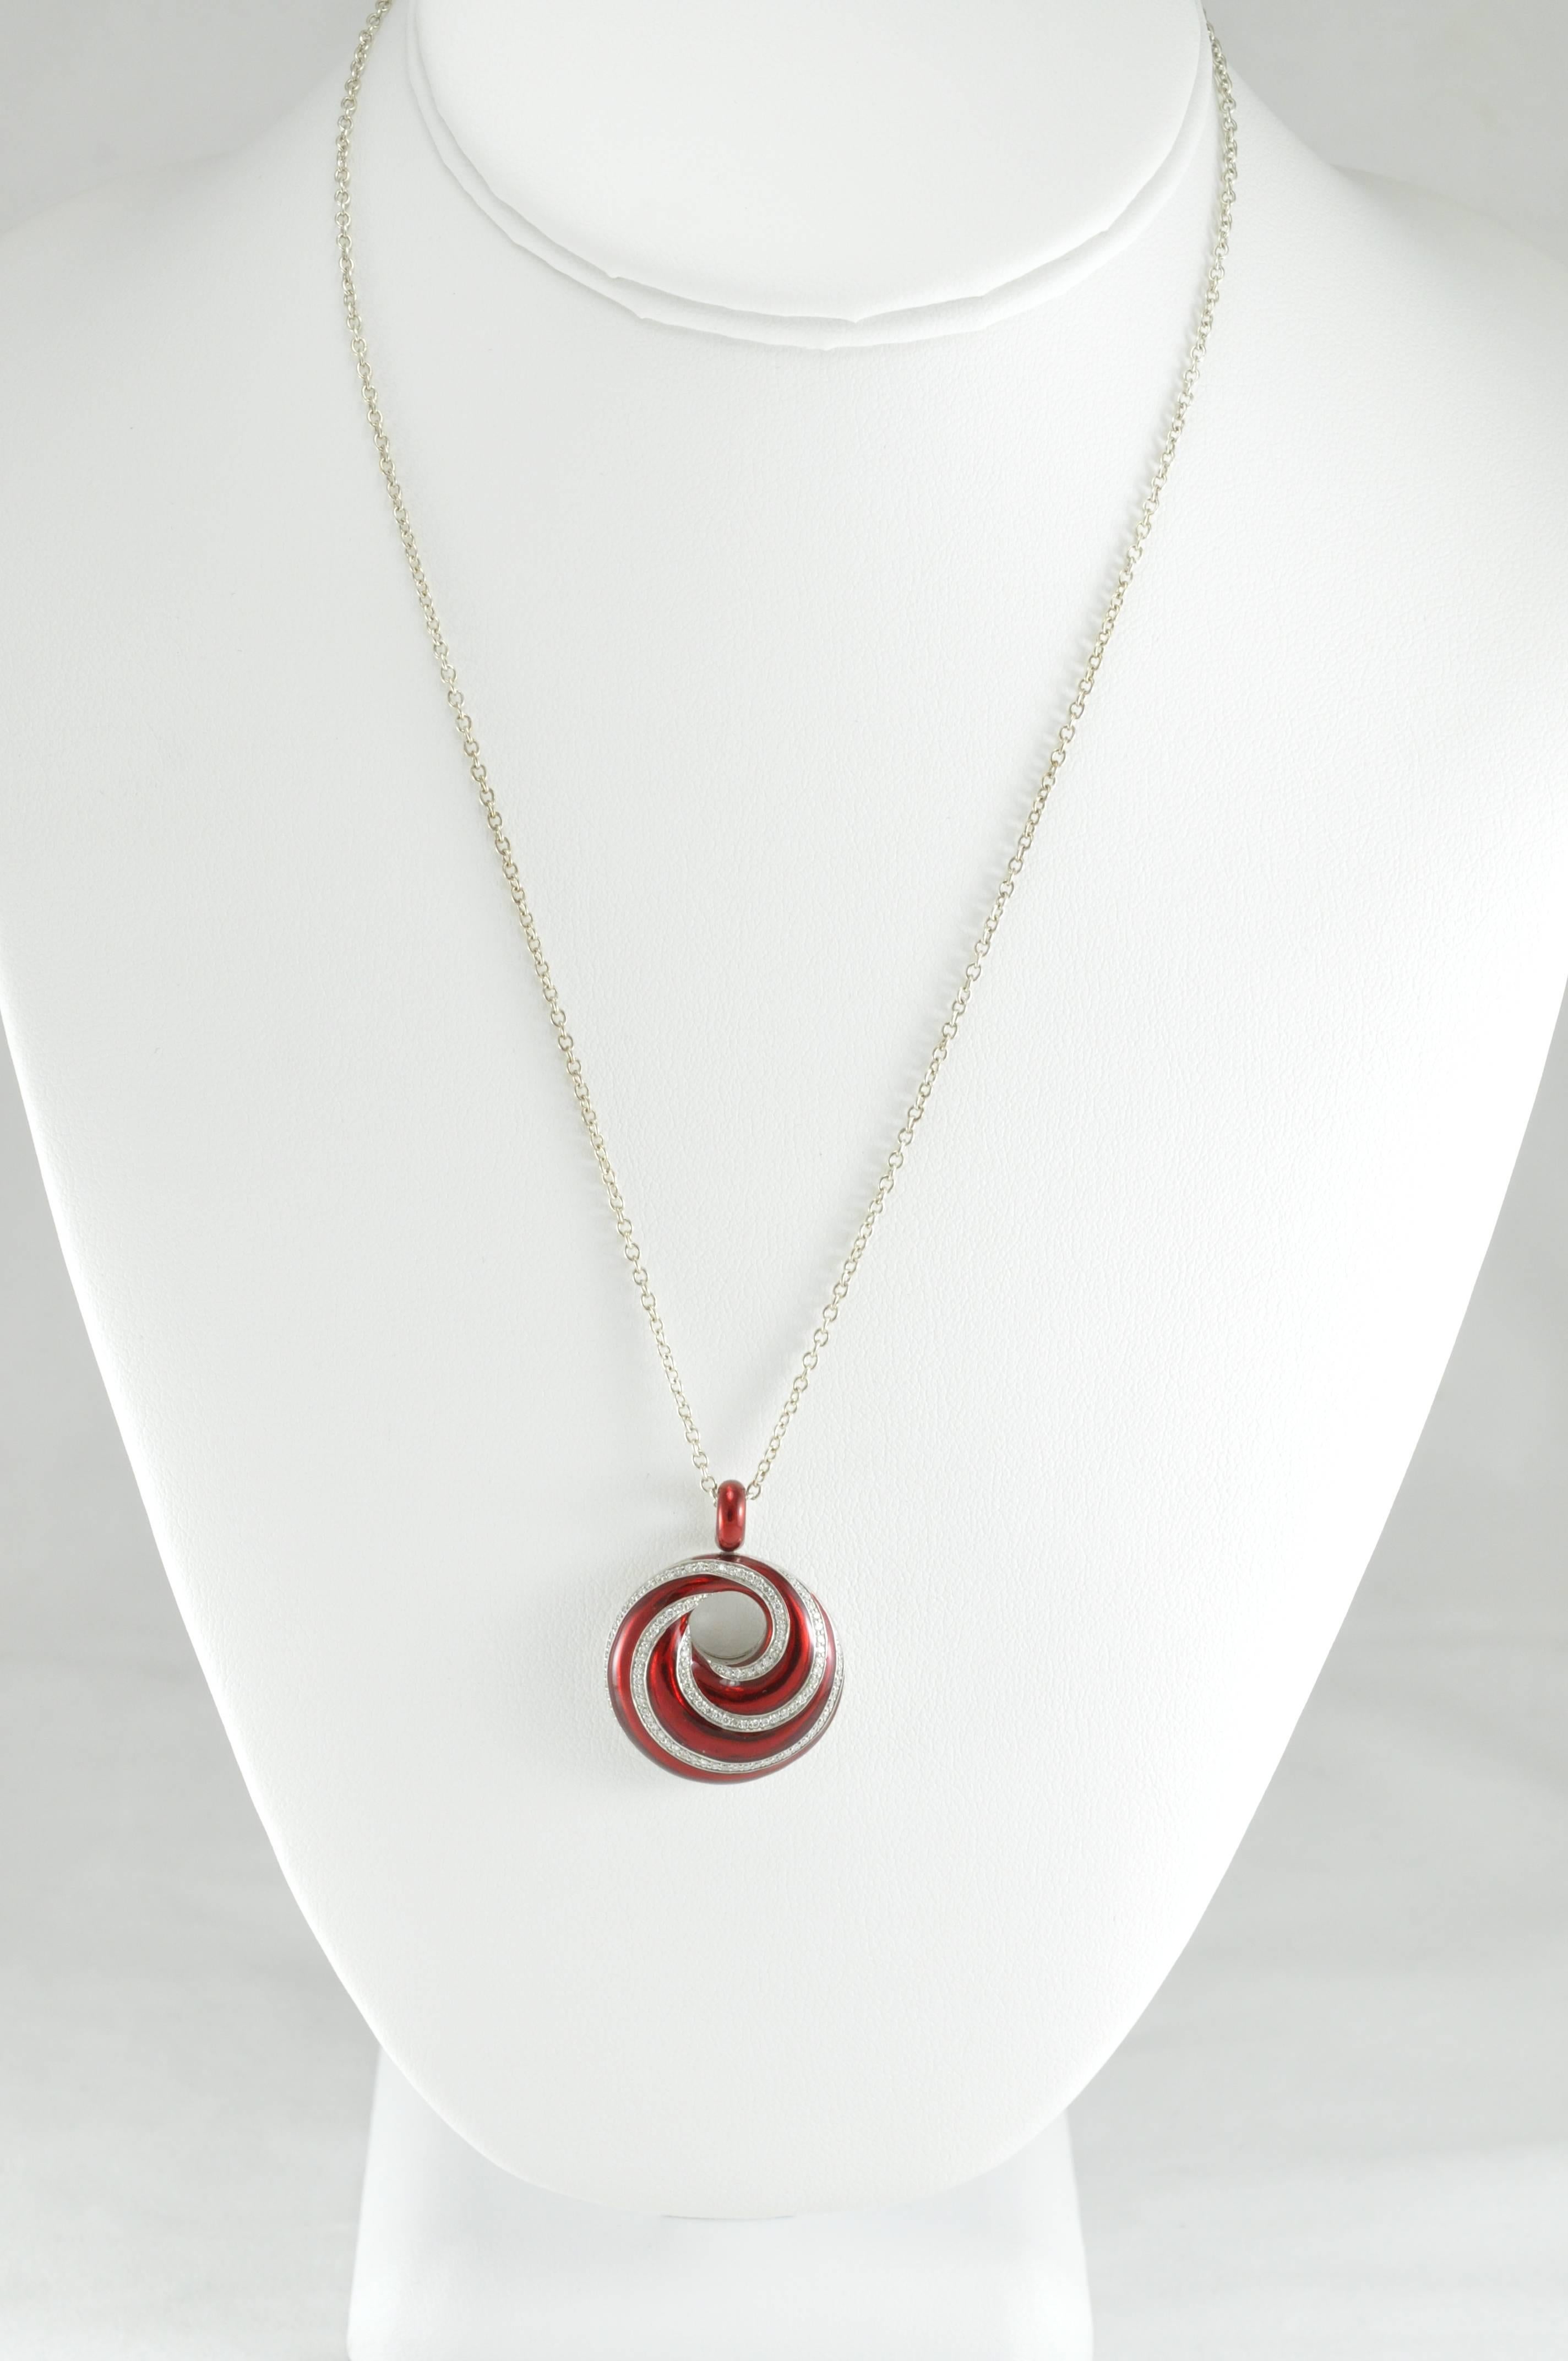 Sterling Silver Necklace with a .65ctw Diamond Enamel Swirl
18 inch chain

Italian Design 
